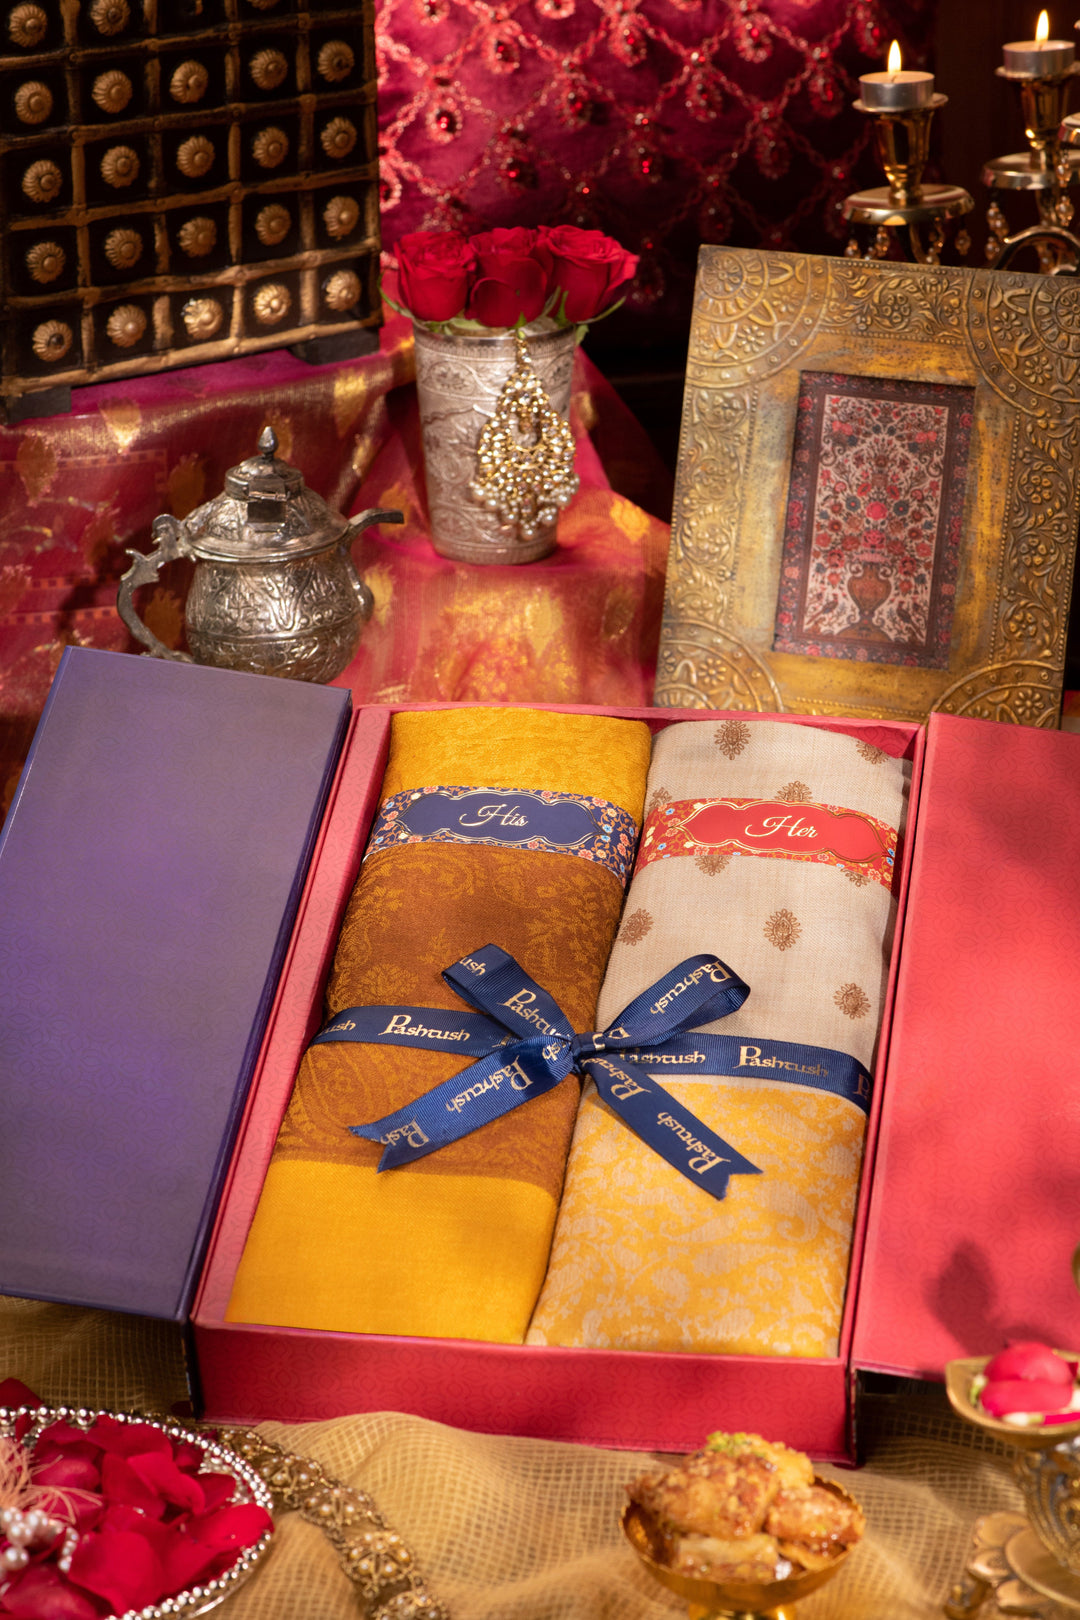 Pashtush India Gift Pack Pashtush His And Her Gift Set Of Fine Wool Stole and Embroidery Shawl With Premium Gift Box Packaging, Mustard and Orange